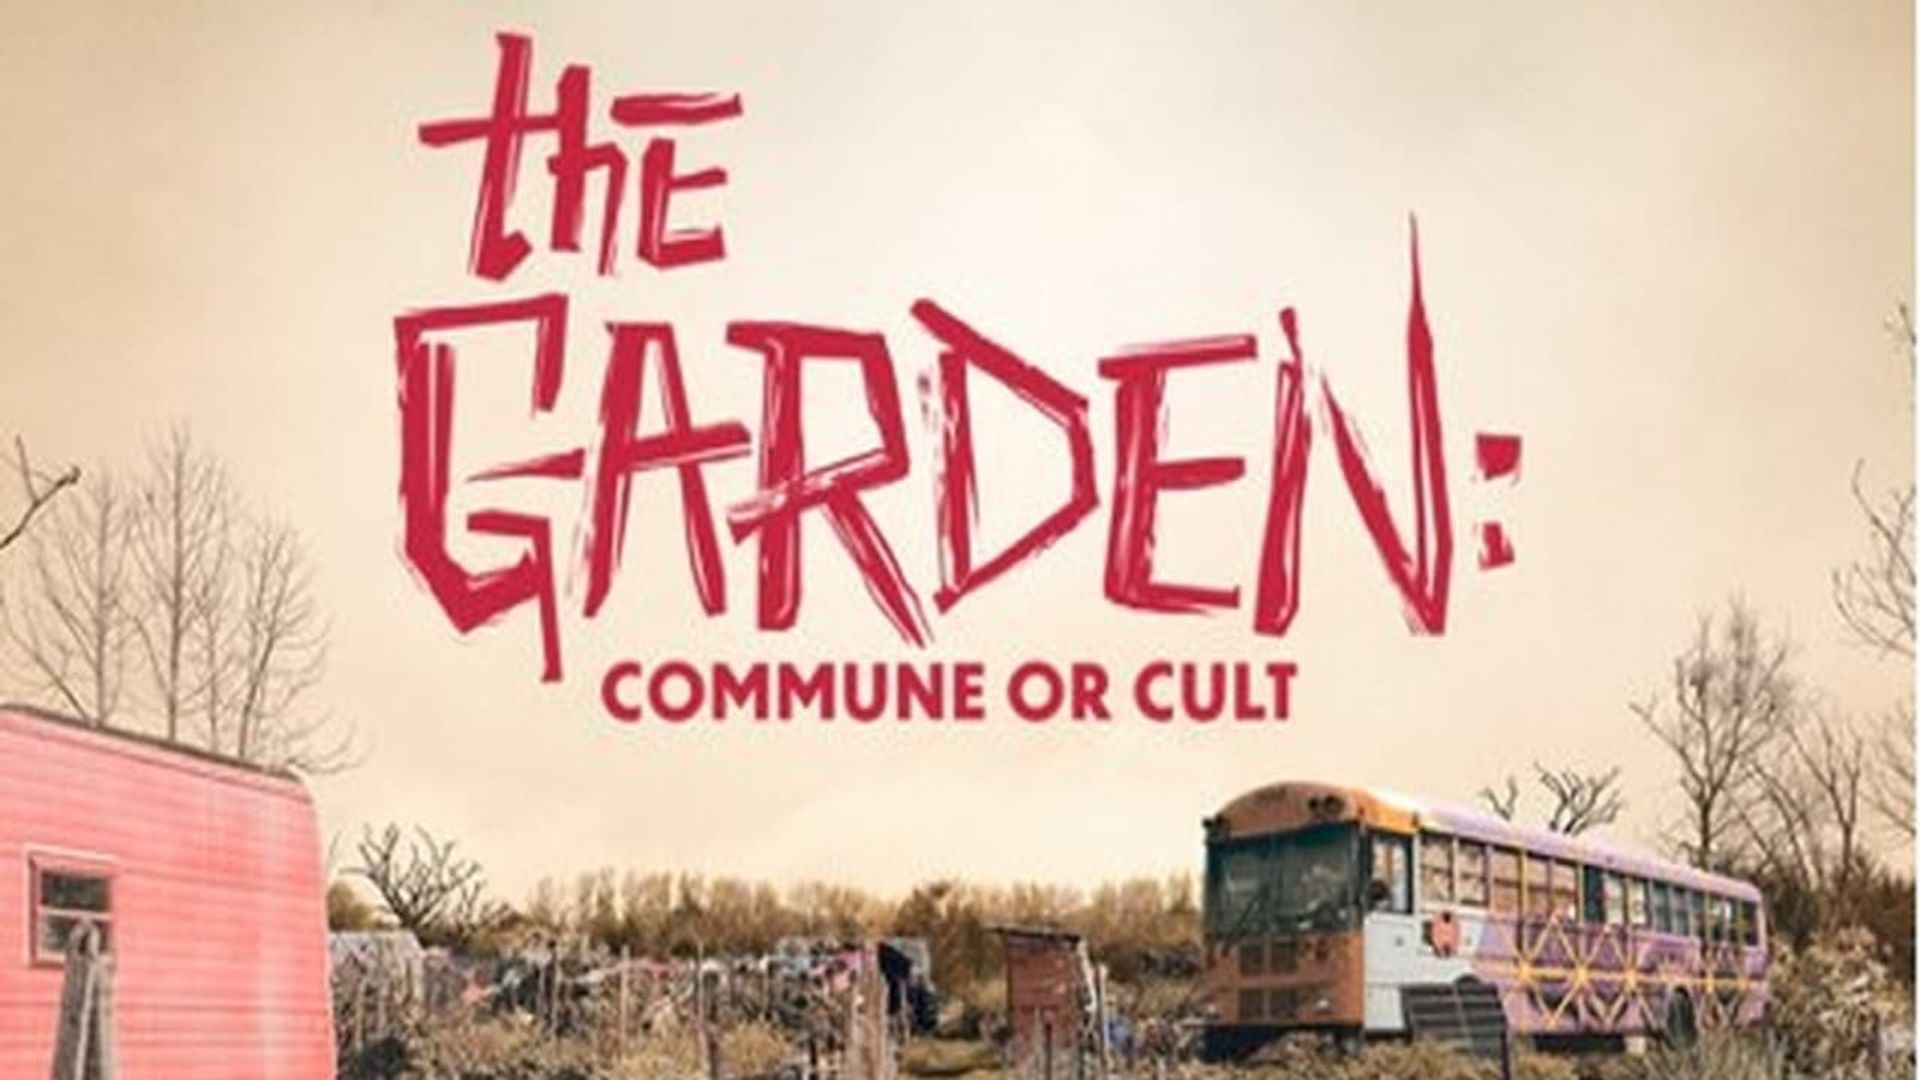 The Garden: Commune or Cult background